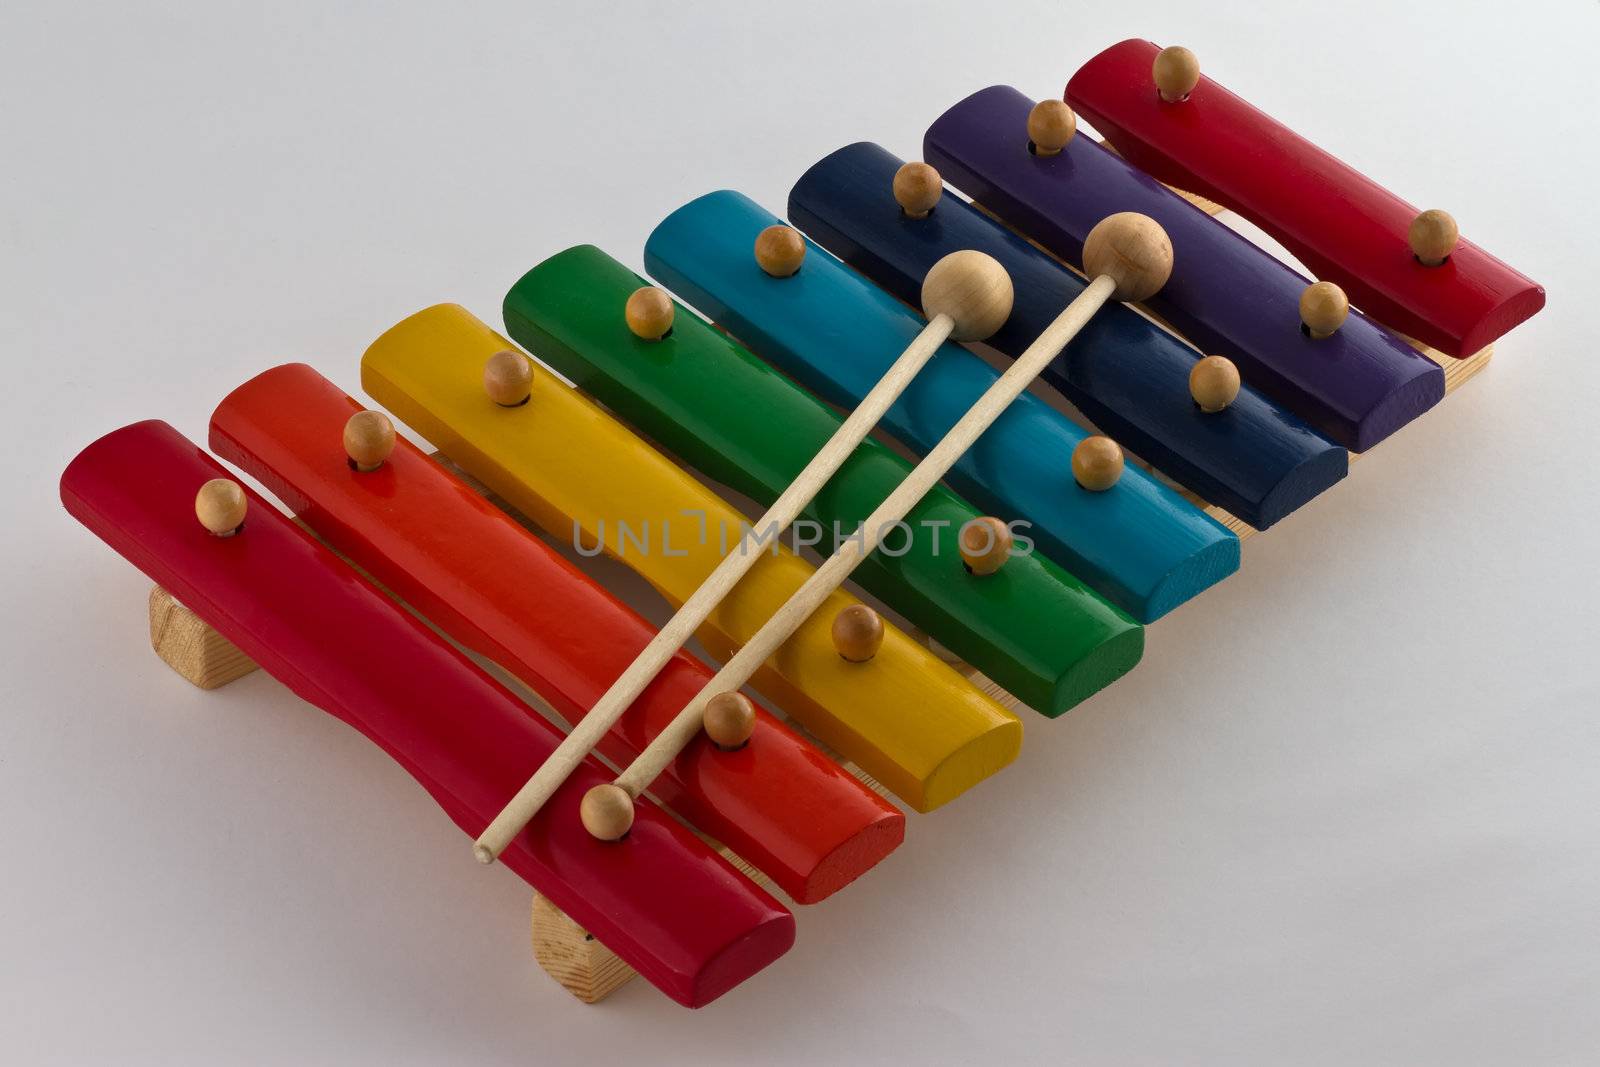 Colorful Xylophone by lavsen